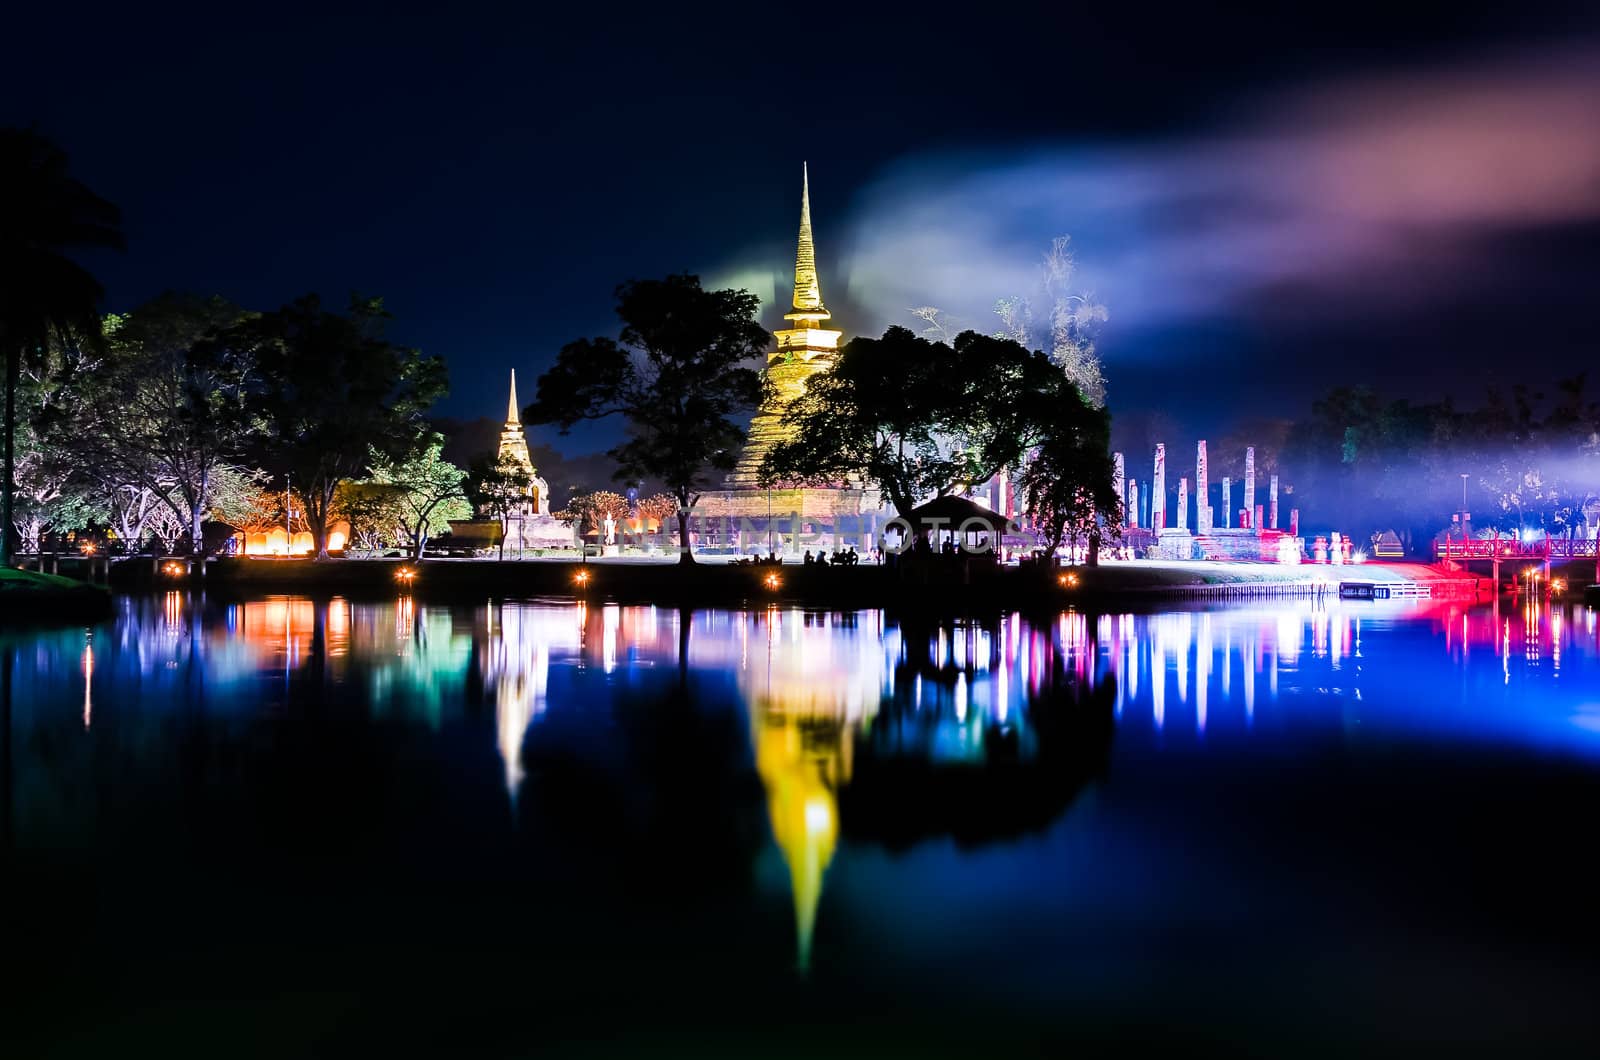 Buddhist colorful temple at night with lake reflection by martinm303